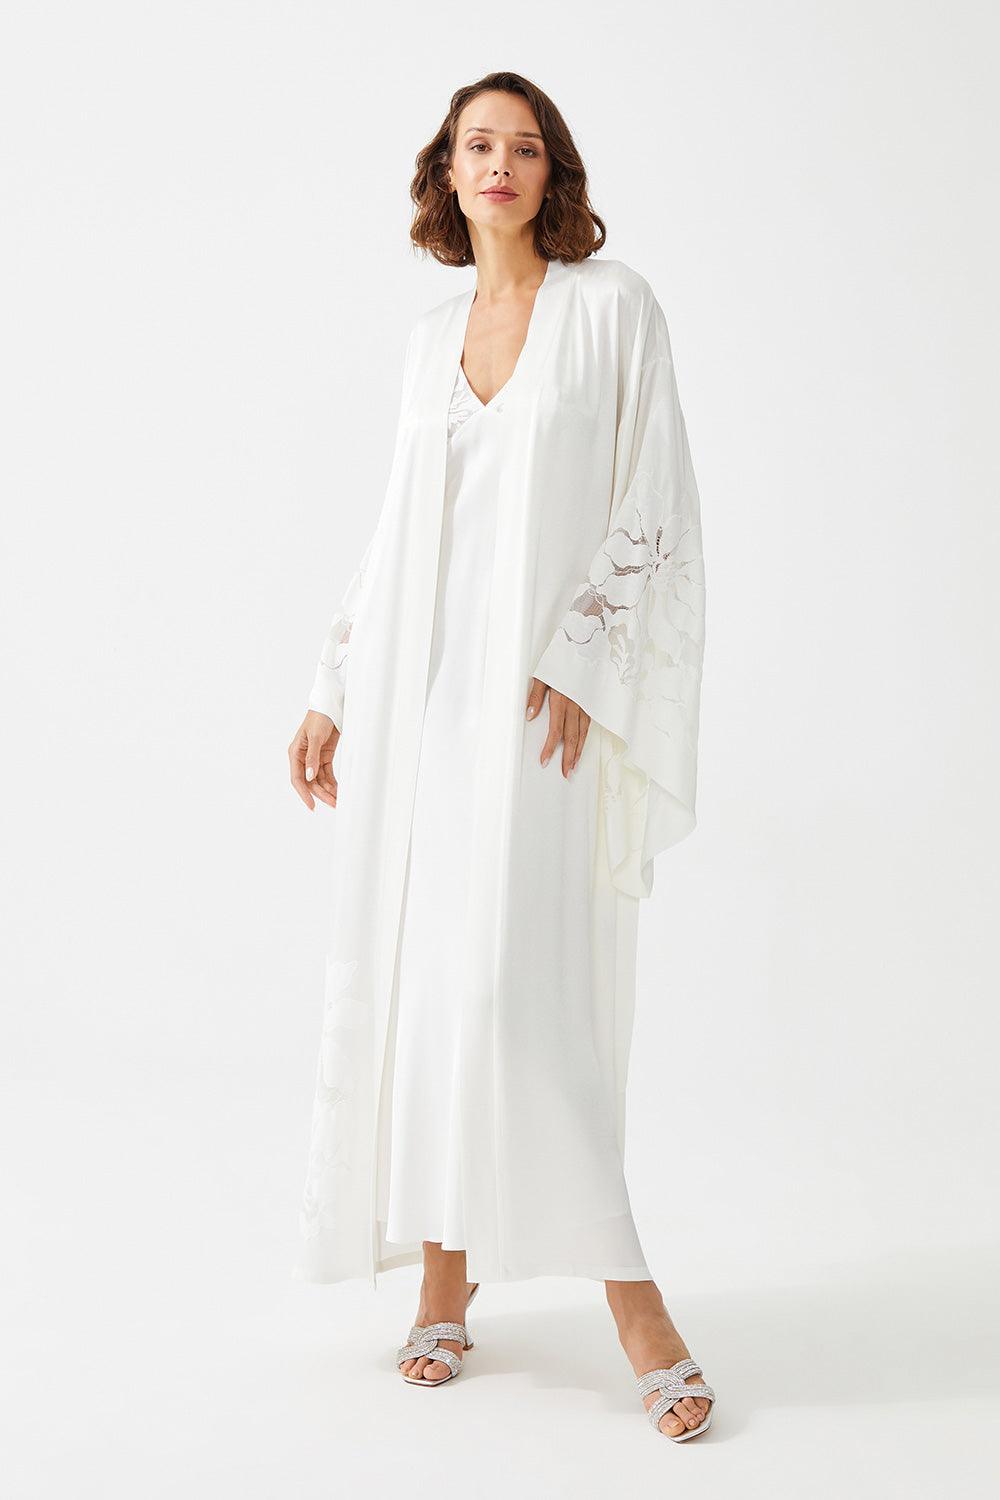 Argos Long Rayon Trimmed with Lace Robe Set - Off White - Bocan